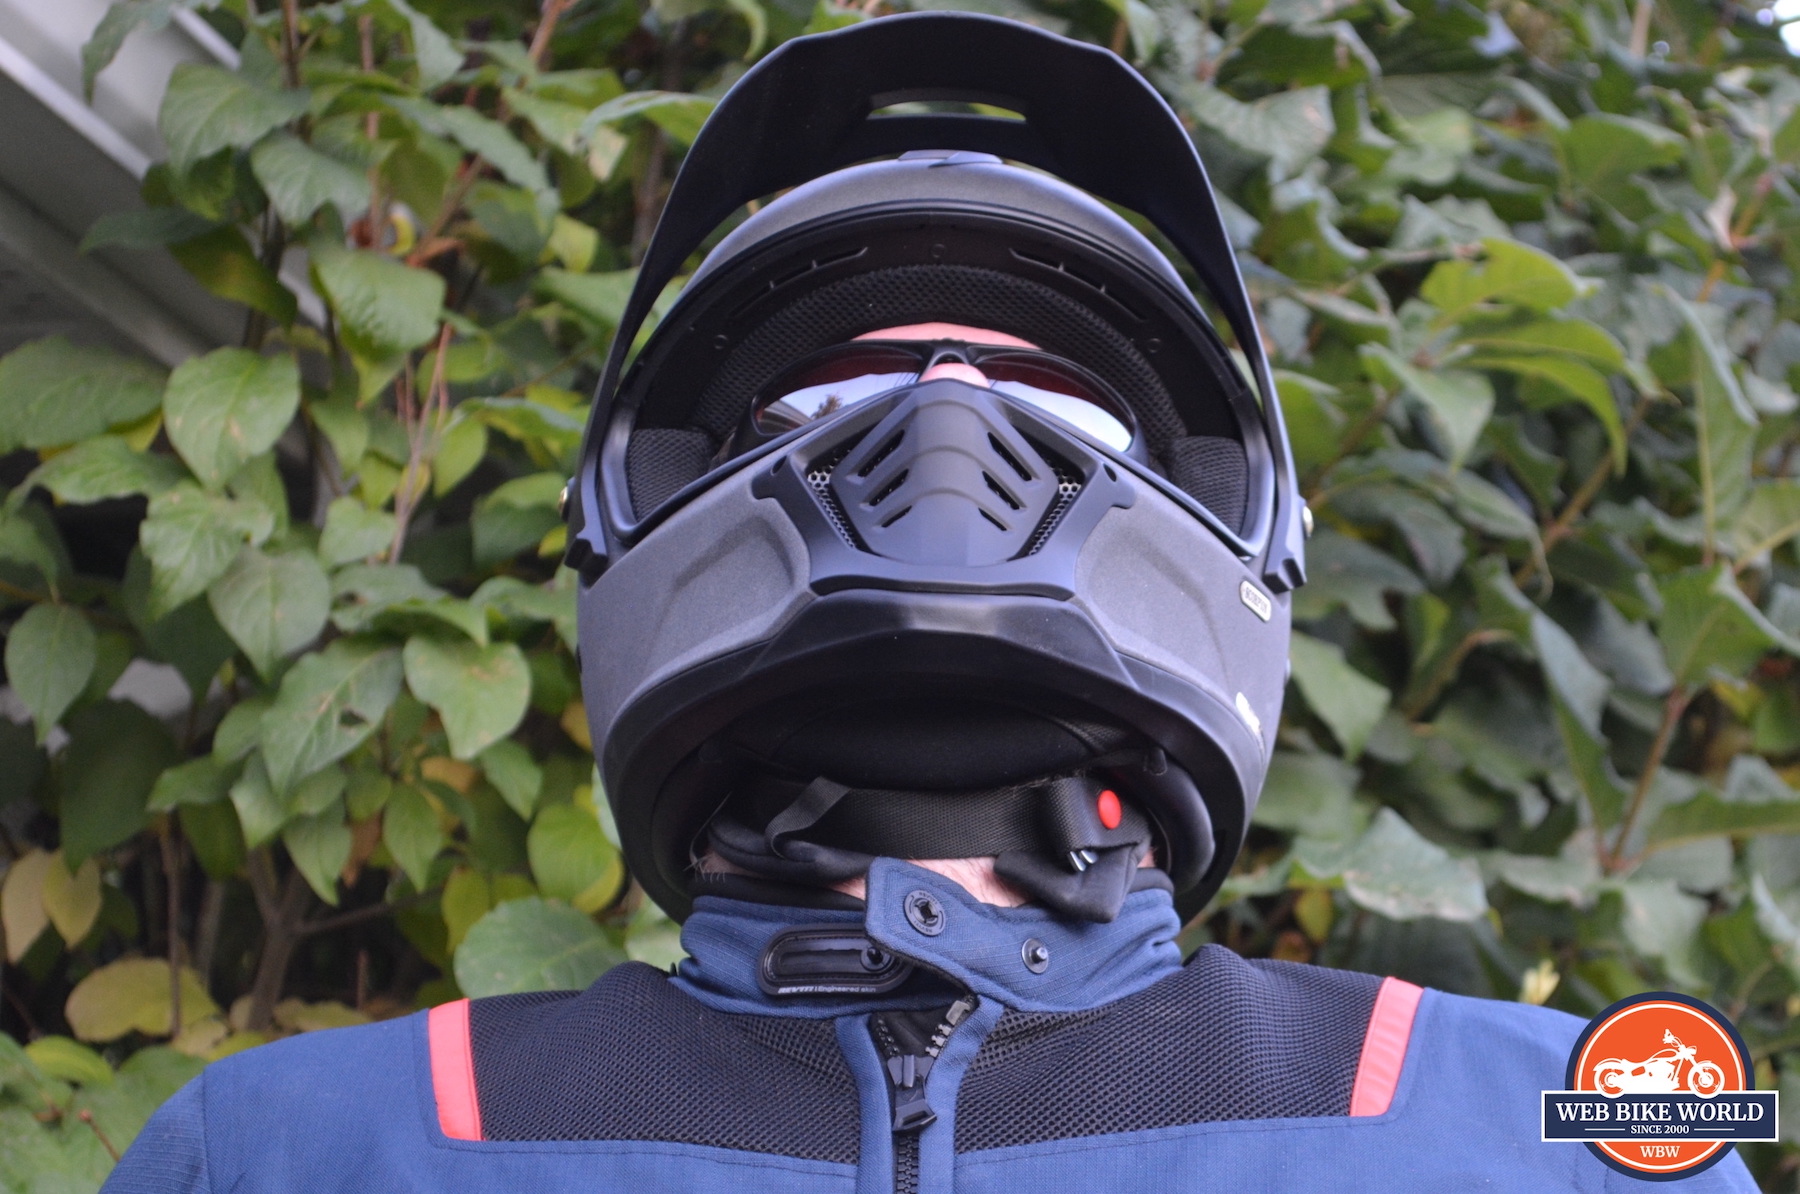 A frontal view of the Scorpion EXO HX1 Helmet with a view of the chin strap and chin curtain